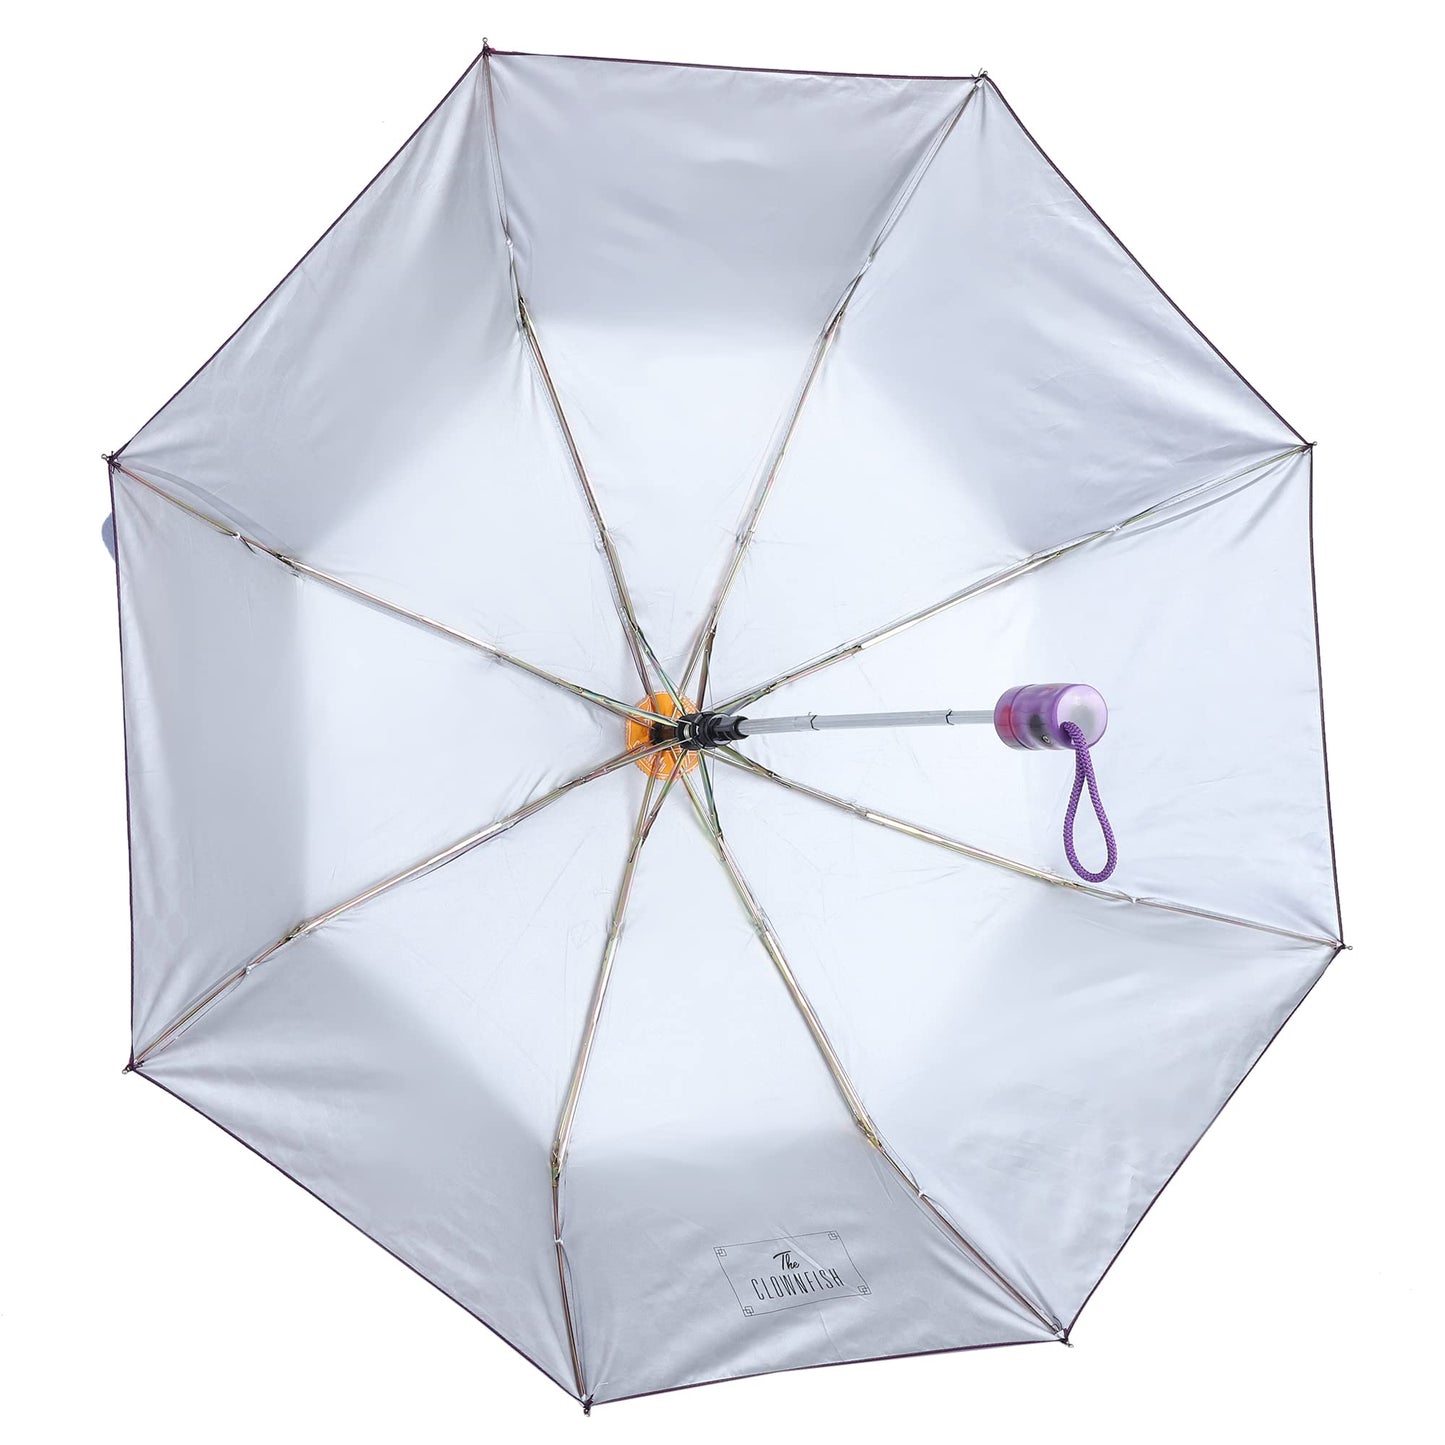 THE CLOWNFISH Umbrella 3 Fold Auto Open Waterproof Pongee Double Coated Silver Lined Umbrellas For Men and Women (Printed Design- Lime)